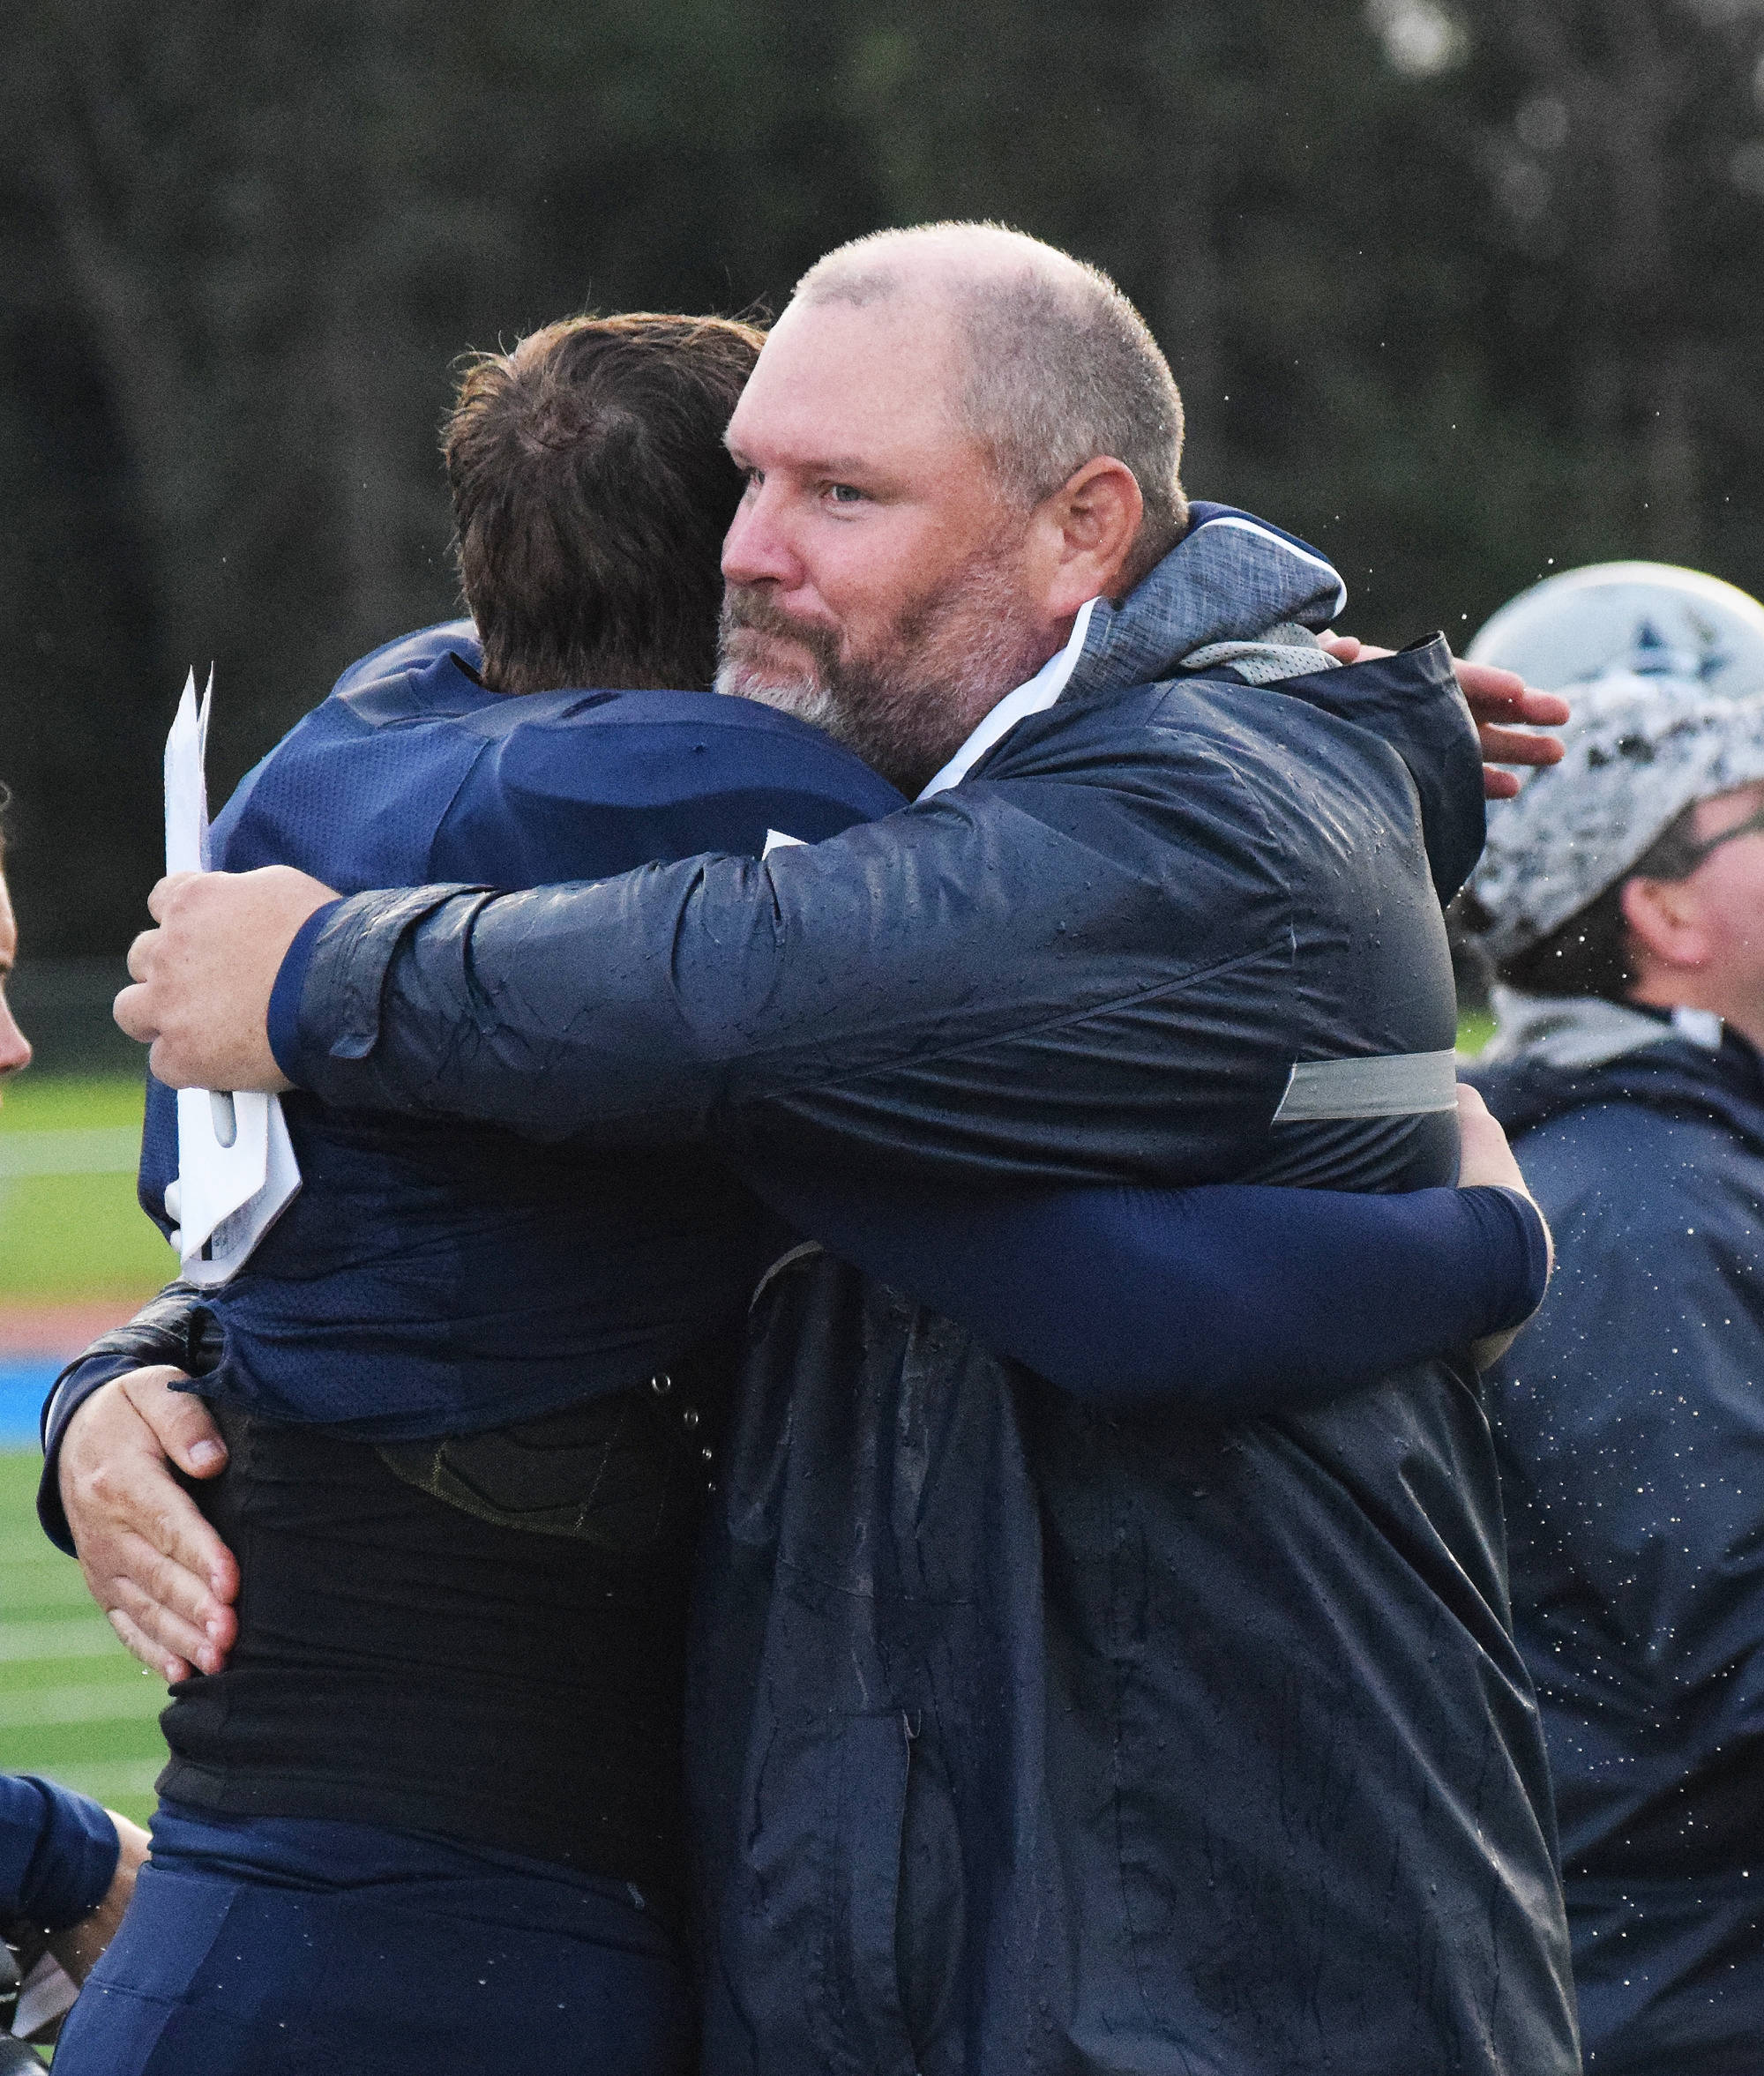 Soldotna head football coach Galen Brantley Jr. hugs senior quarterback Brandon Crowder after Friday night’s 52-7 win over South Anchorage at Justin Maile Field in Soldotna. The win was the 100th in Brantley Jr.’s coaching career. (Photo by Joey Klecka/Peninsula Clarion)